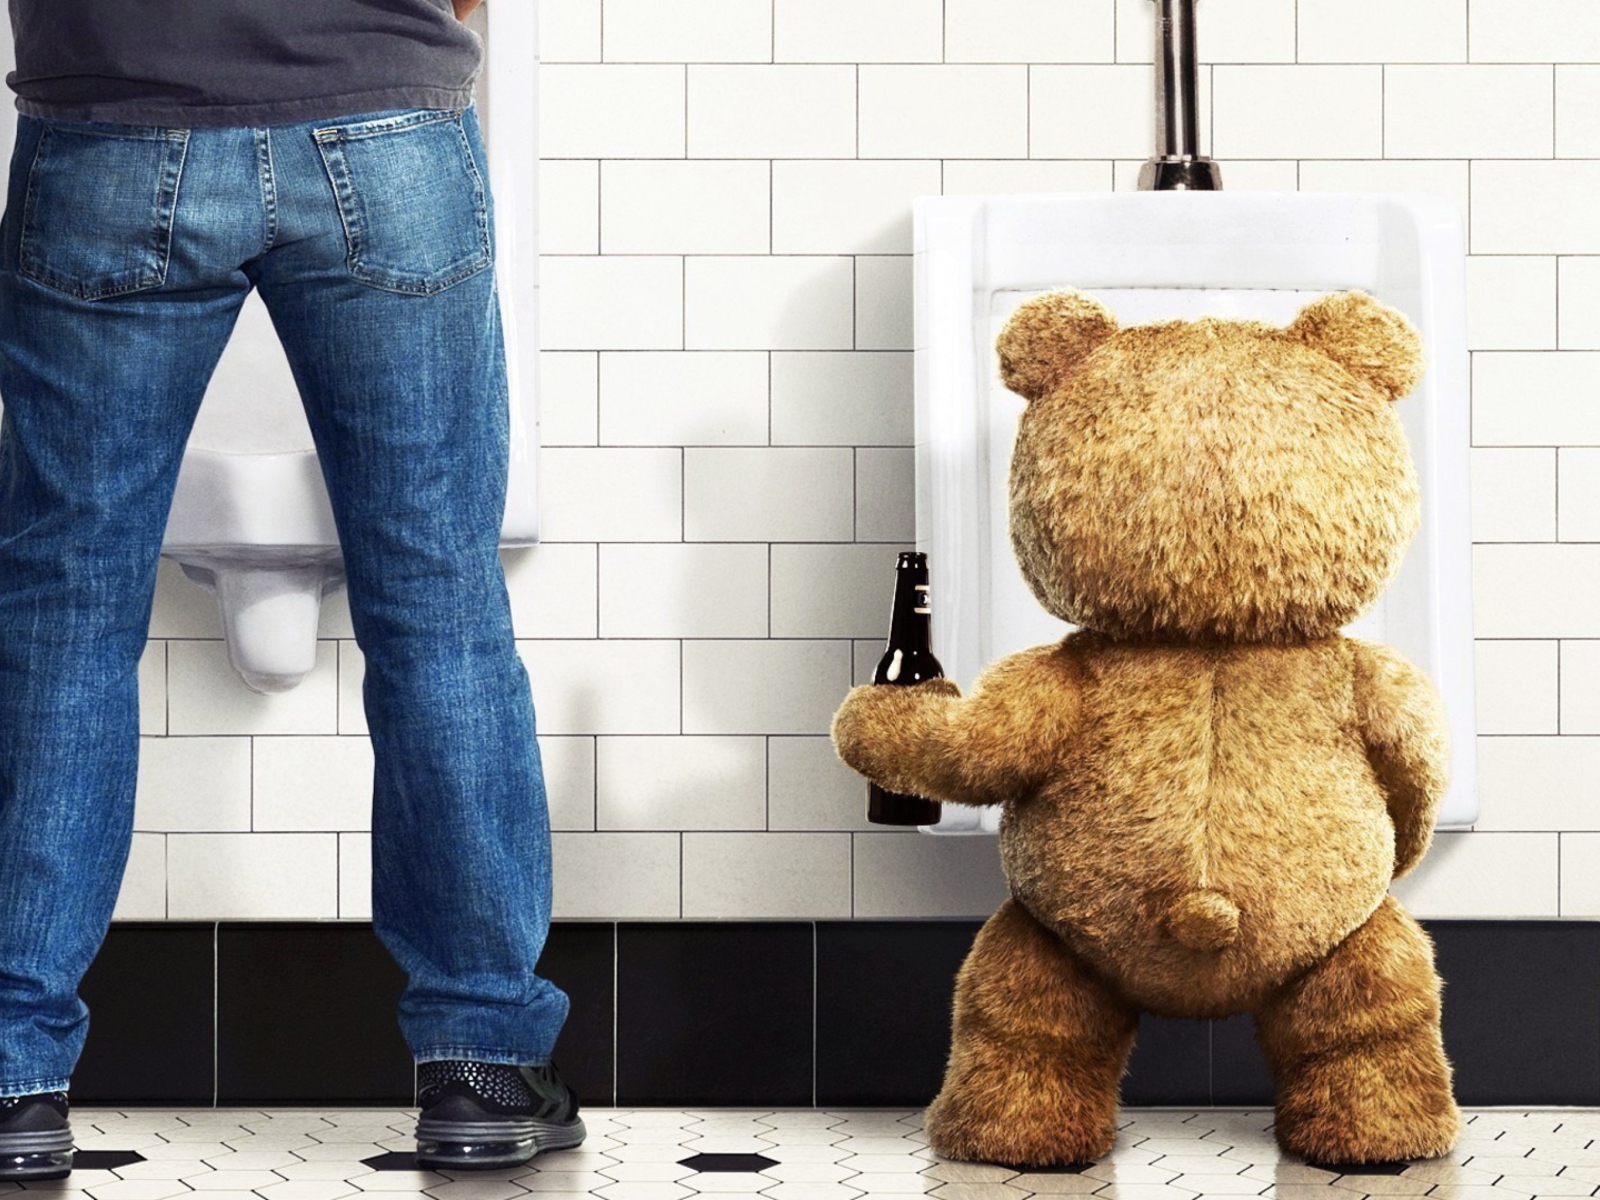 Ted Poster wallpaper 1600x1200